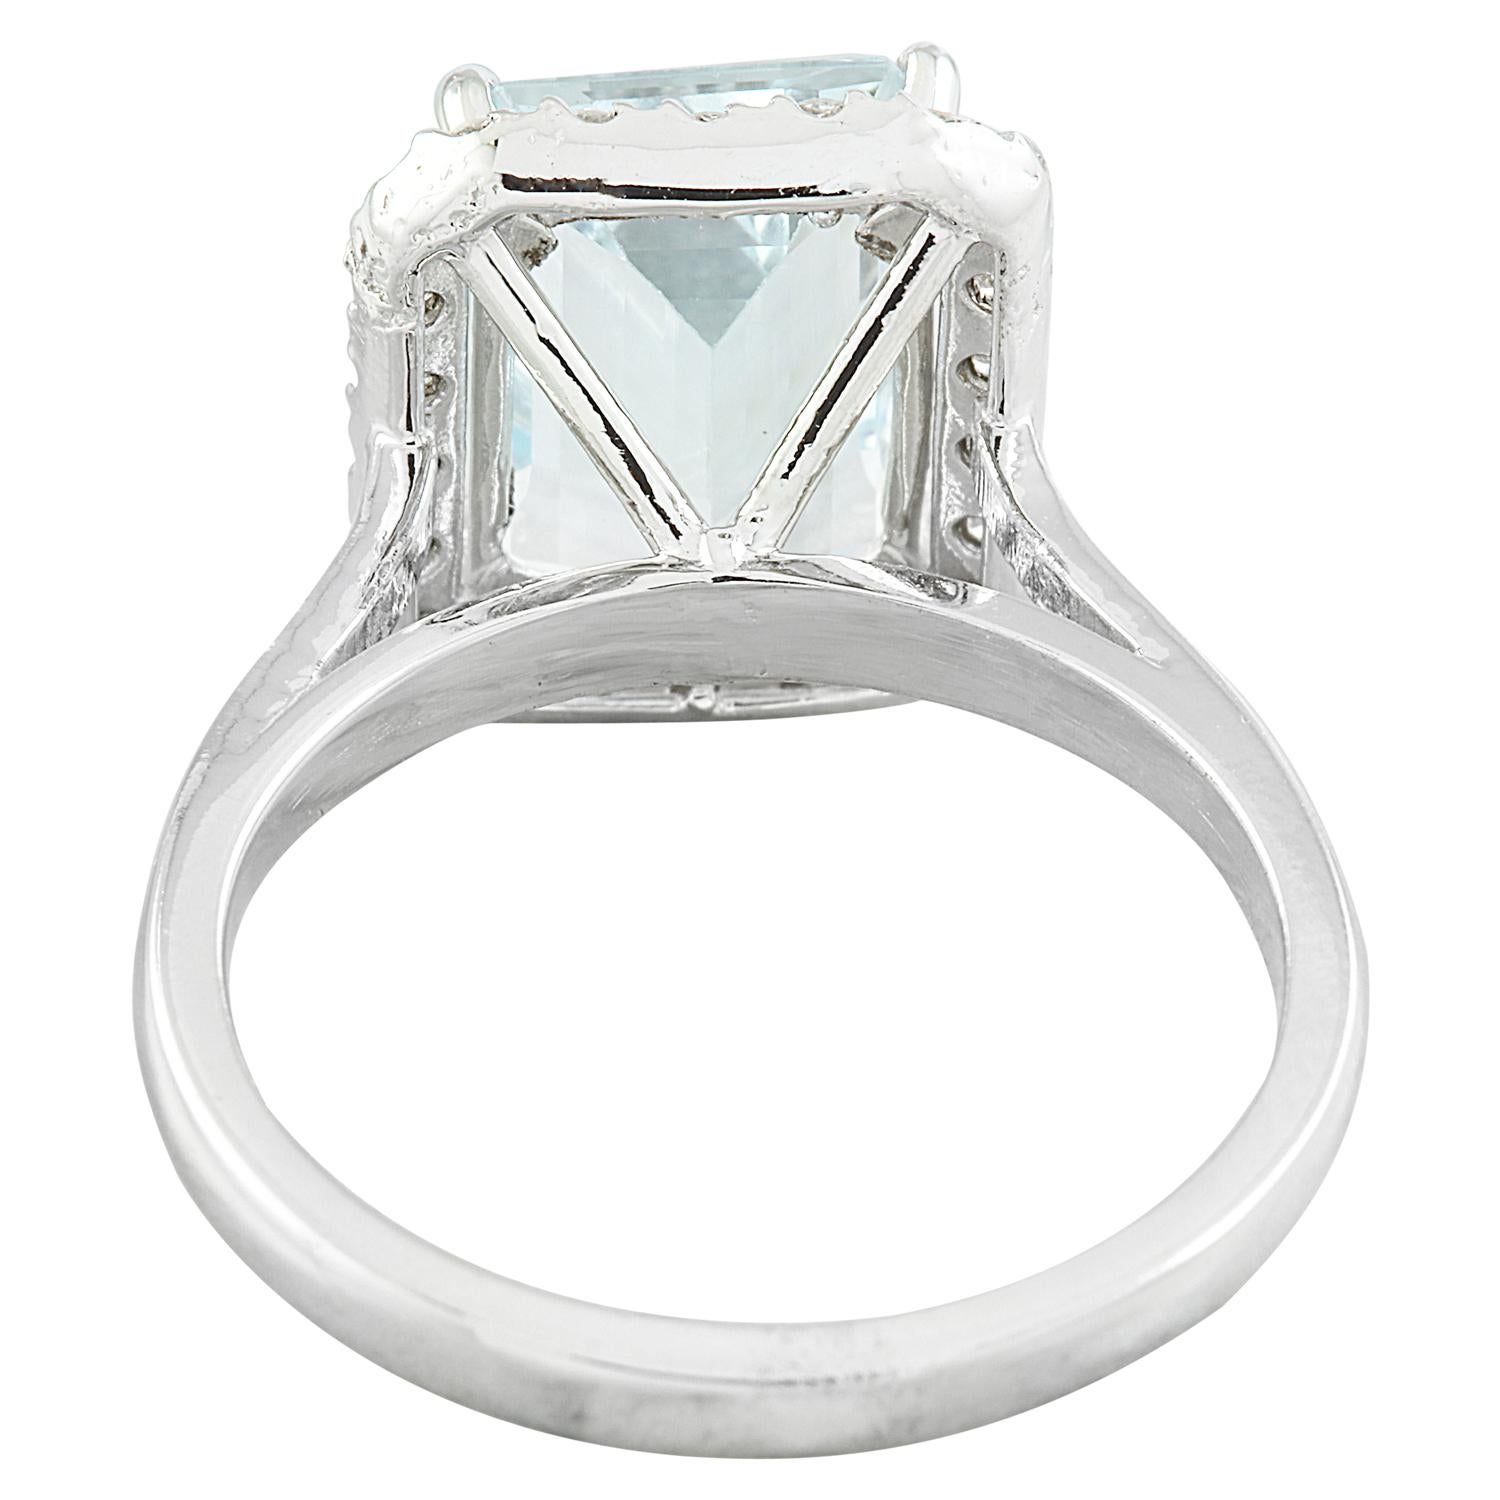 Emerald Cut Natural Aquamarine Diamond Ring: Exquisite Beauty in 14K Solid White Gold For Sale